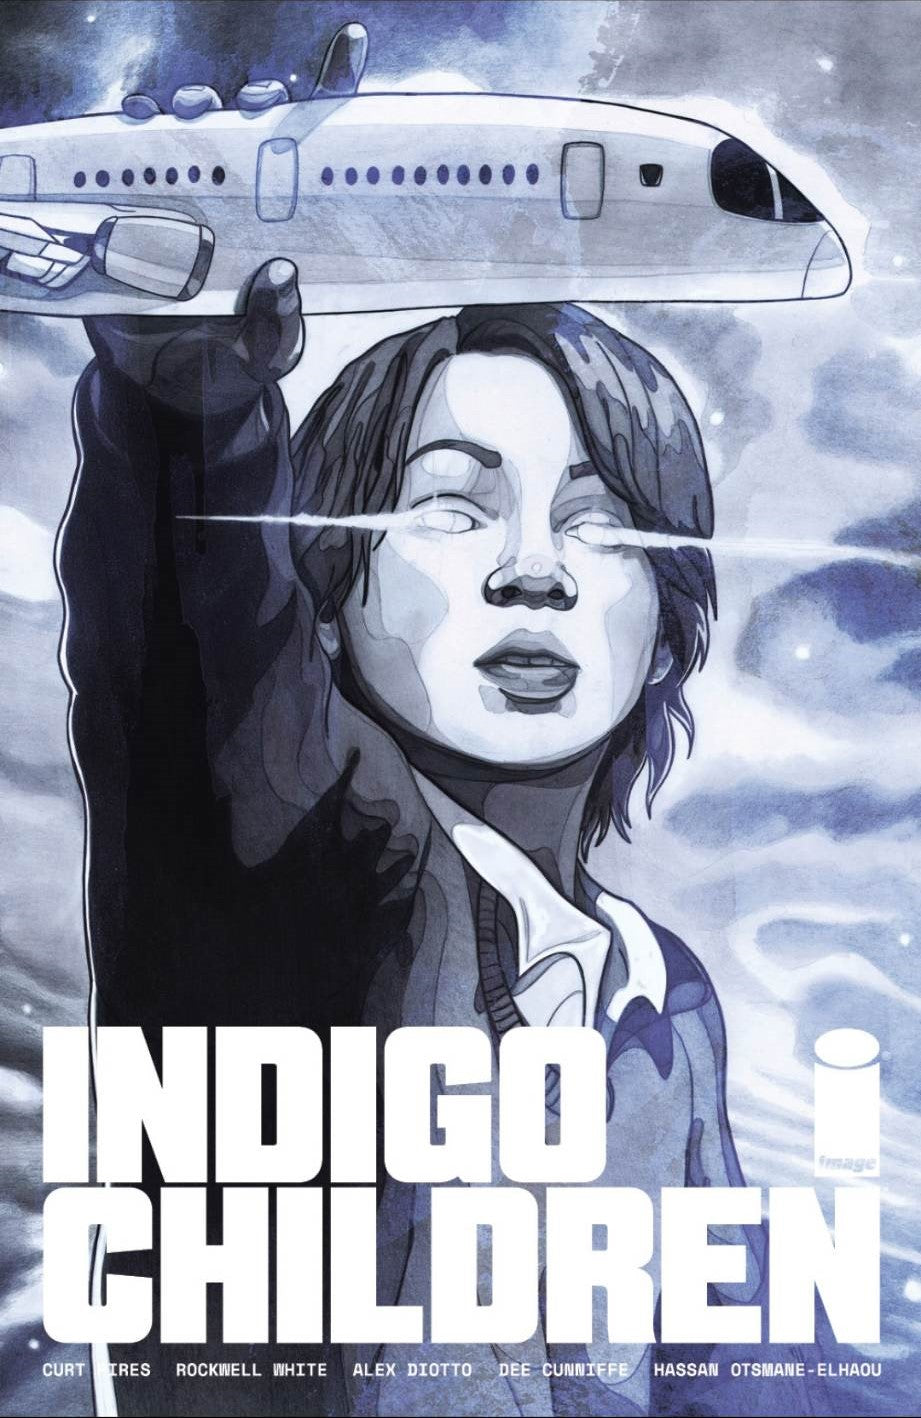 INDIGO CHILDREN #1 Ingrid Gala C2E2 Exclusive! Limited to ONLY 500 Copies! ***Confirmed AMAZON PRIME SHOW!!***